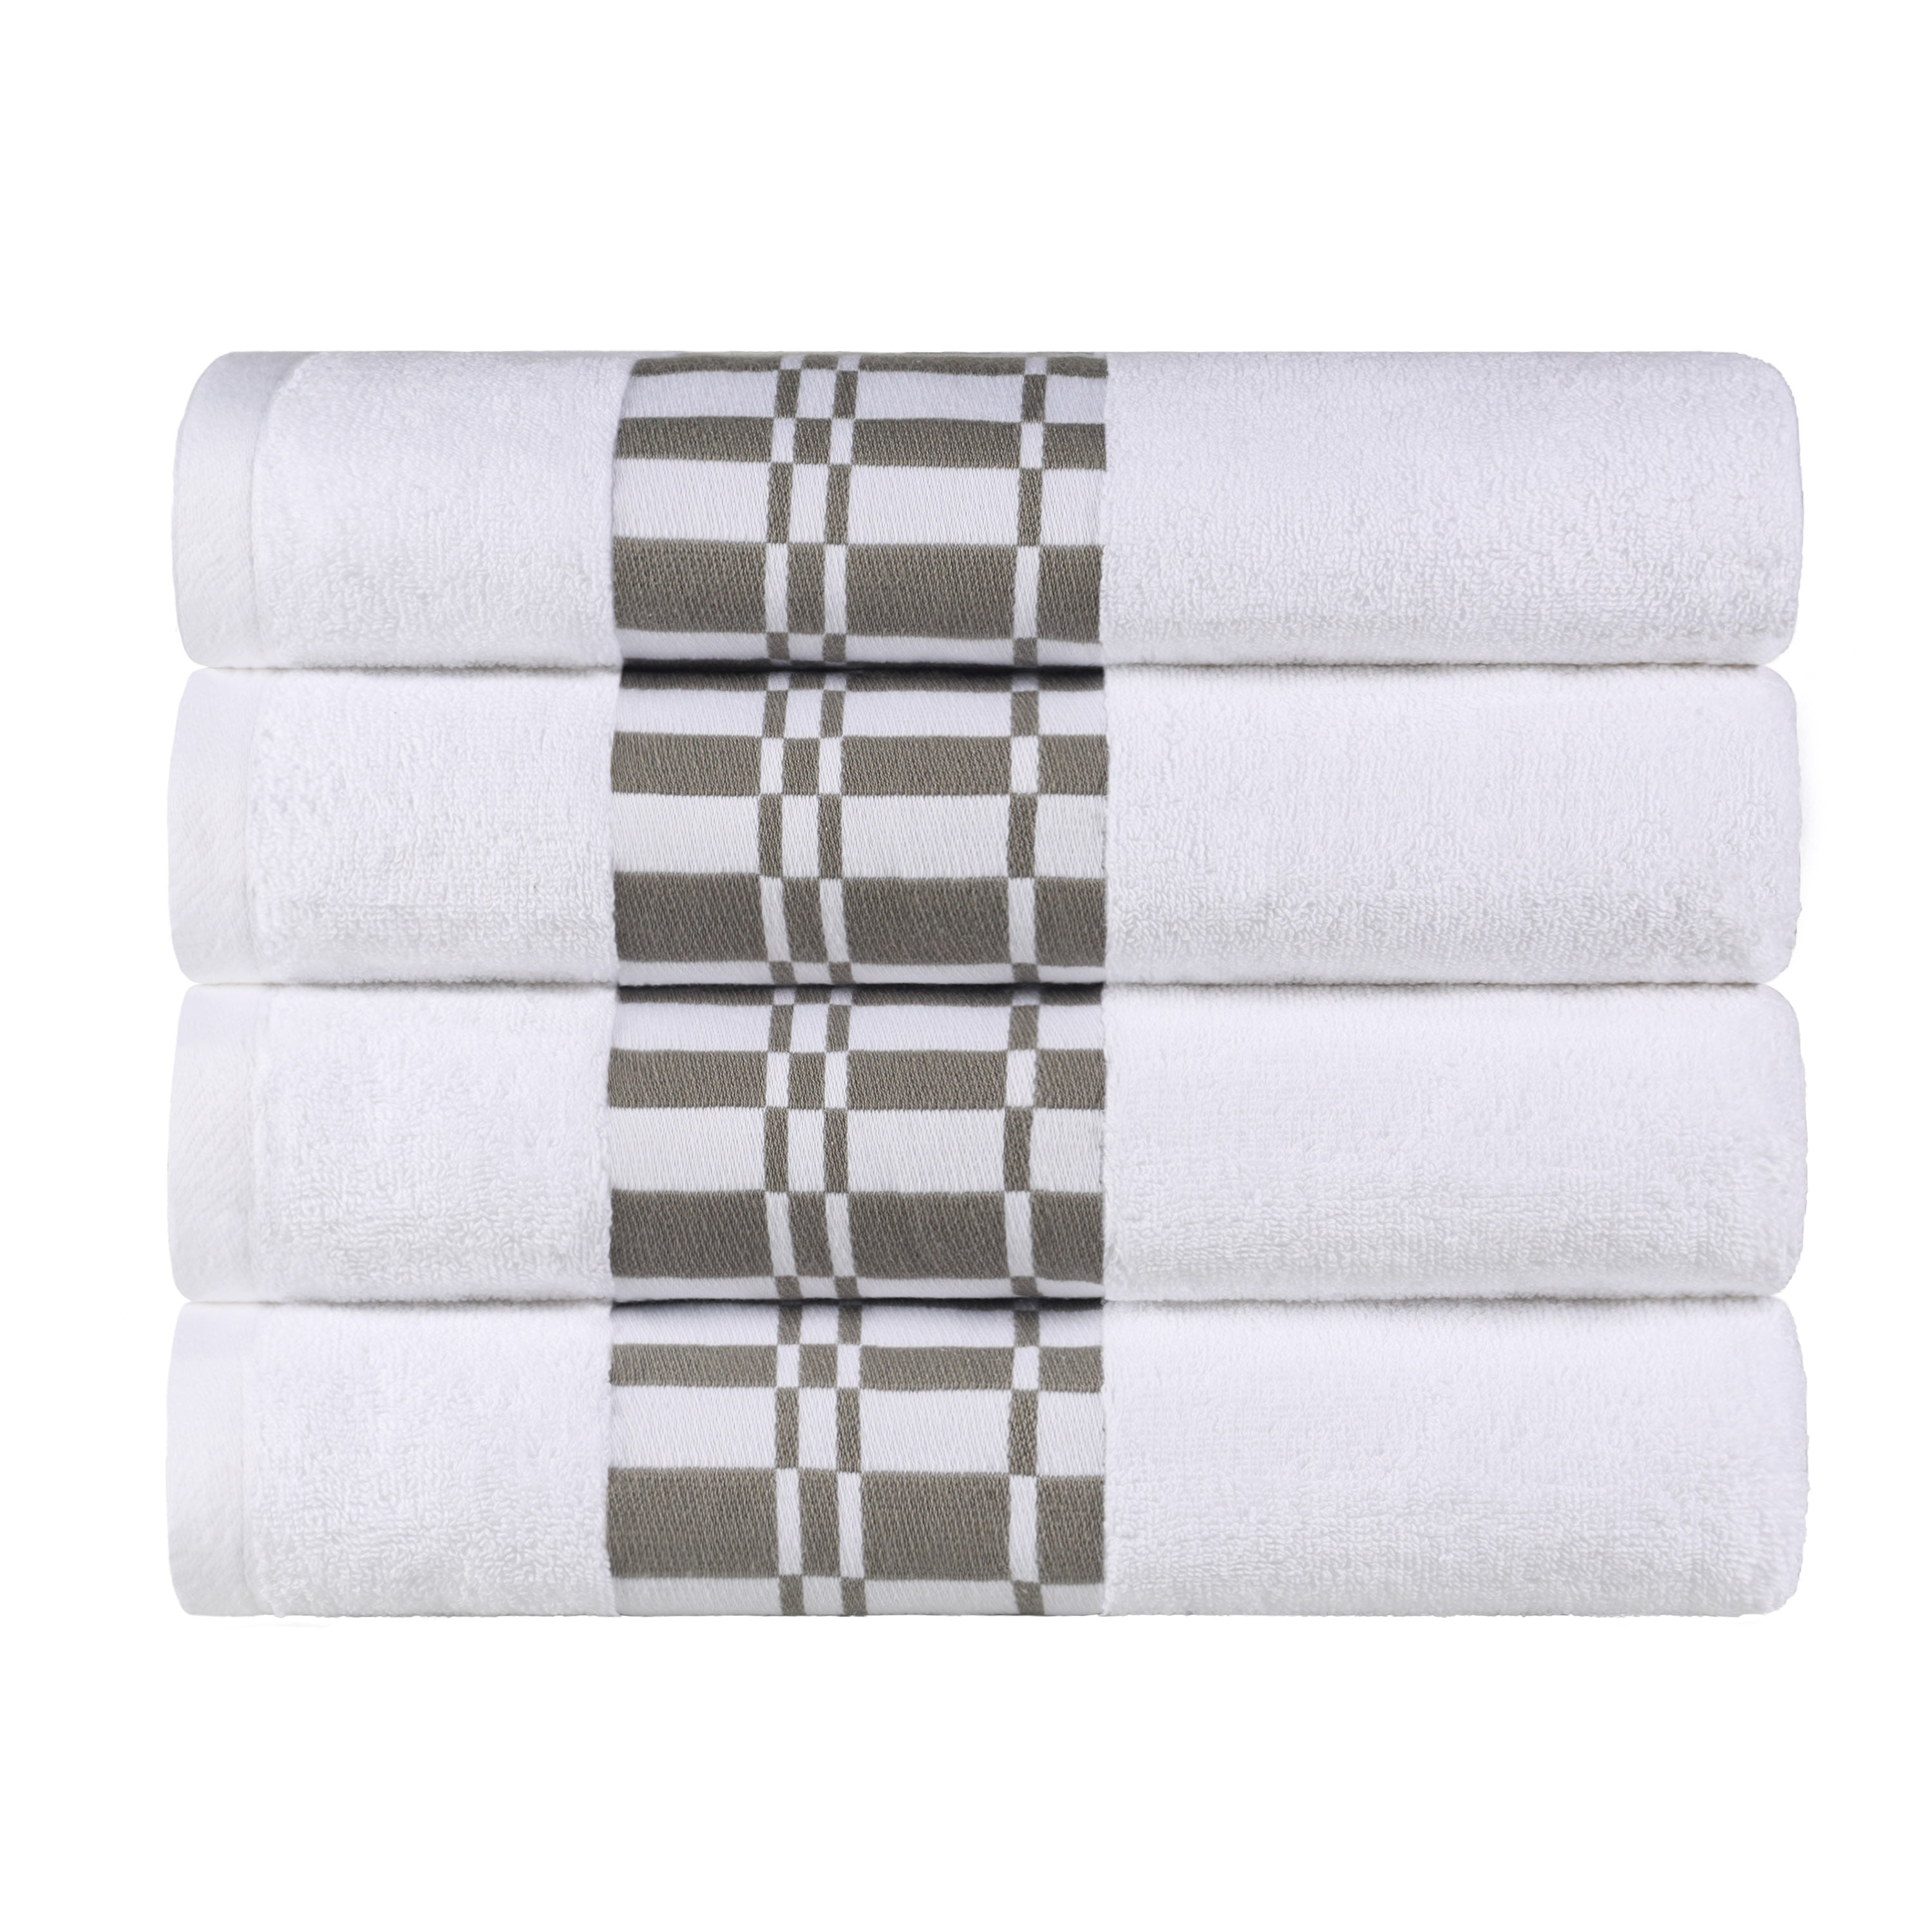 4 Piece Bath Towel Set, Rayon From Bamboo And Cotton, Plush And Thick,  Solid Terry Towels With Dobby Border, Sand - Blue Nile Mills : Target